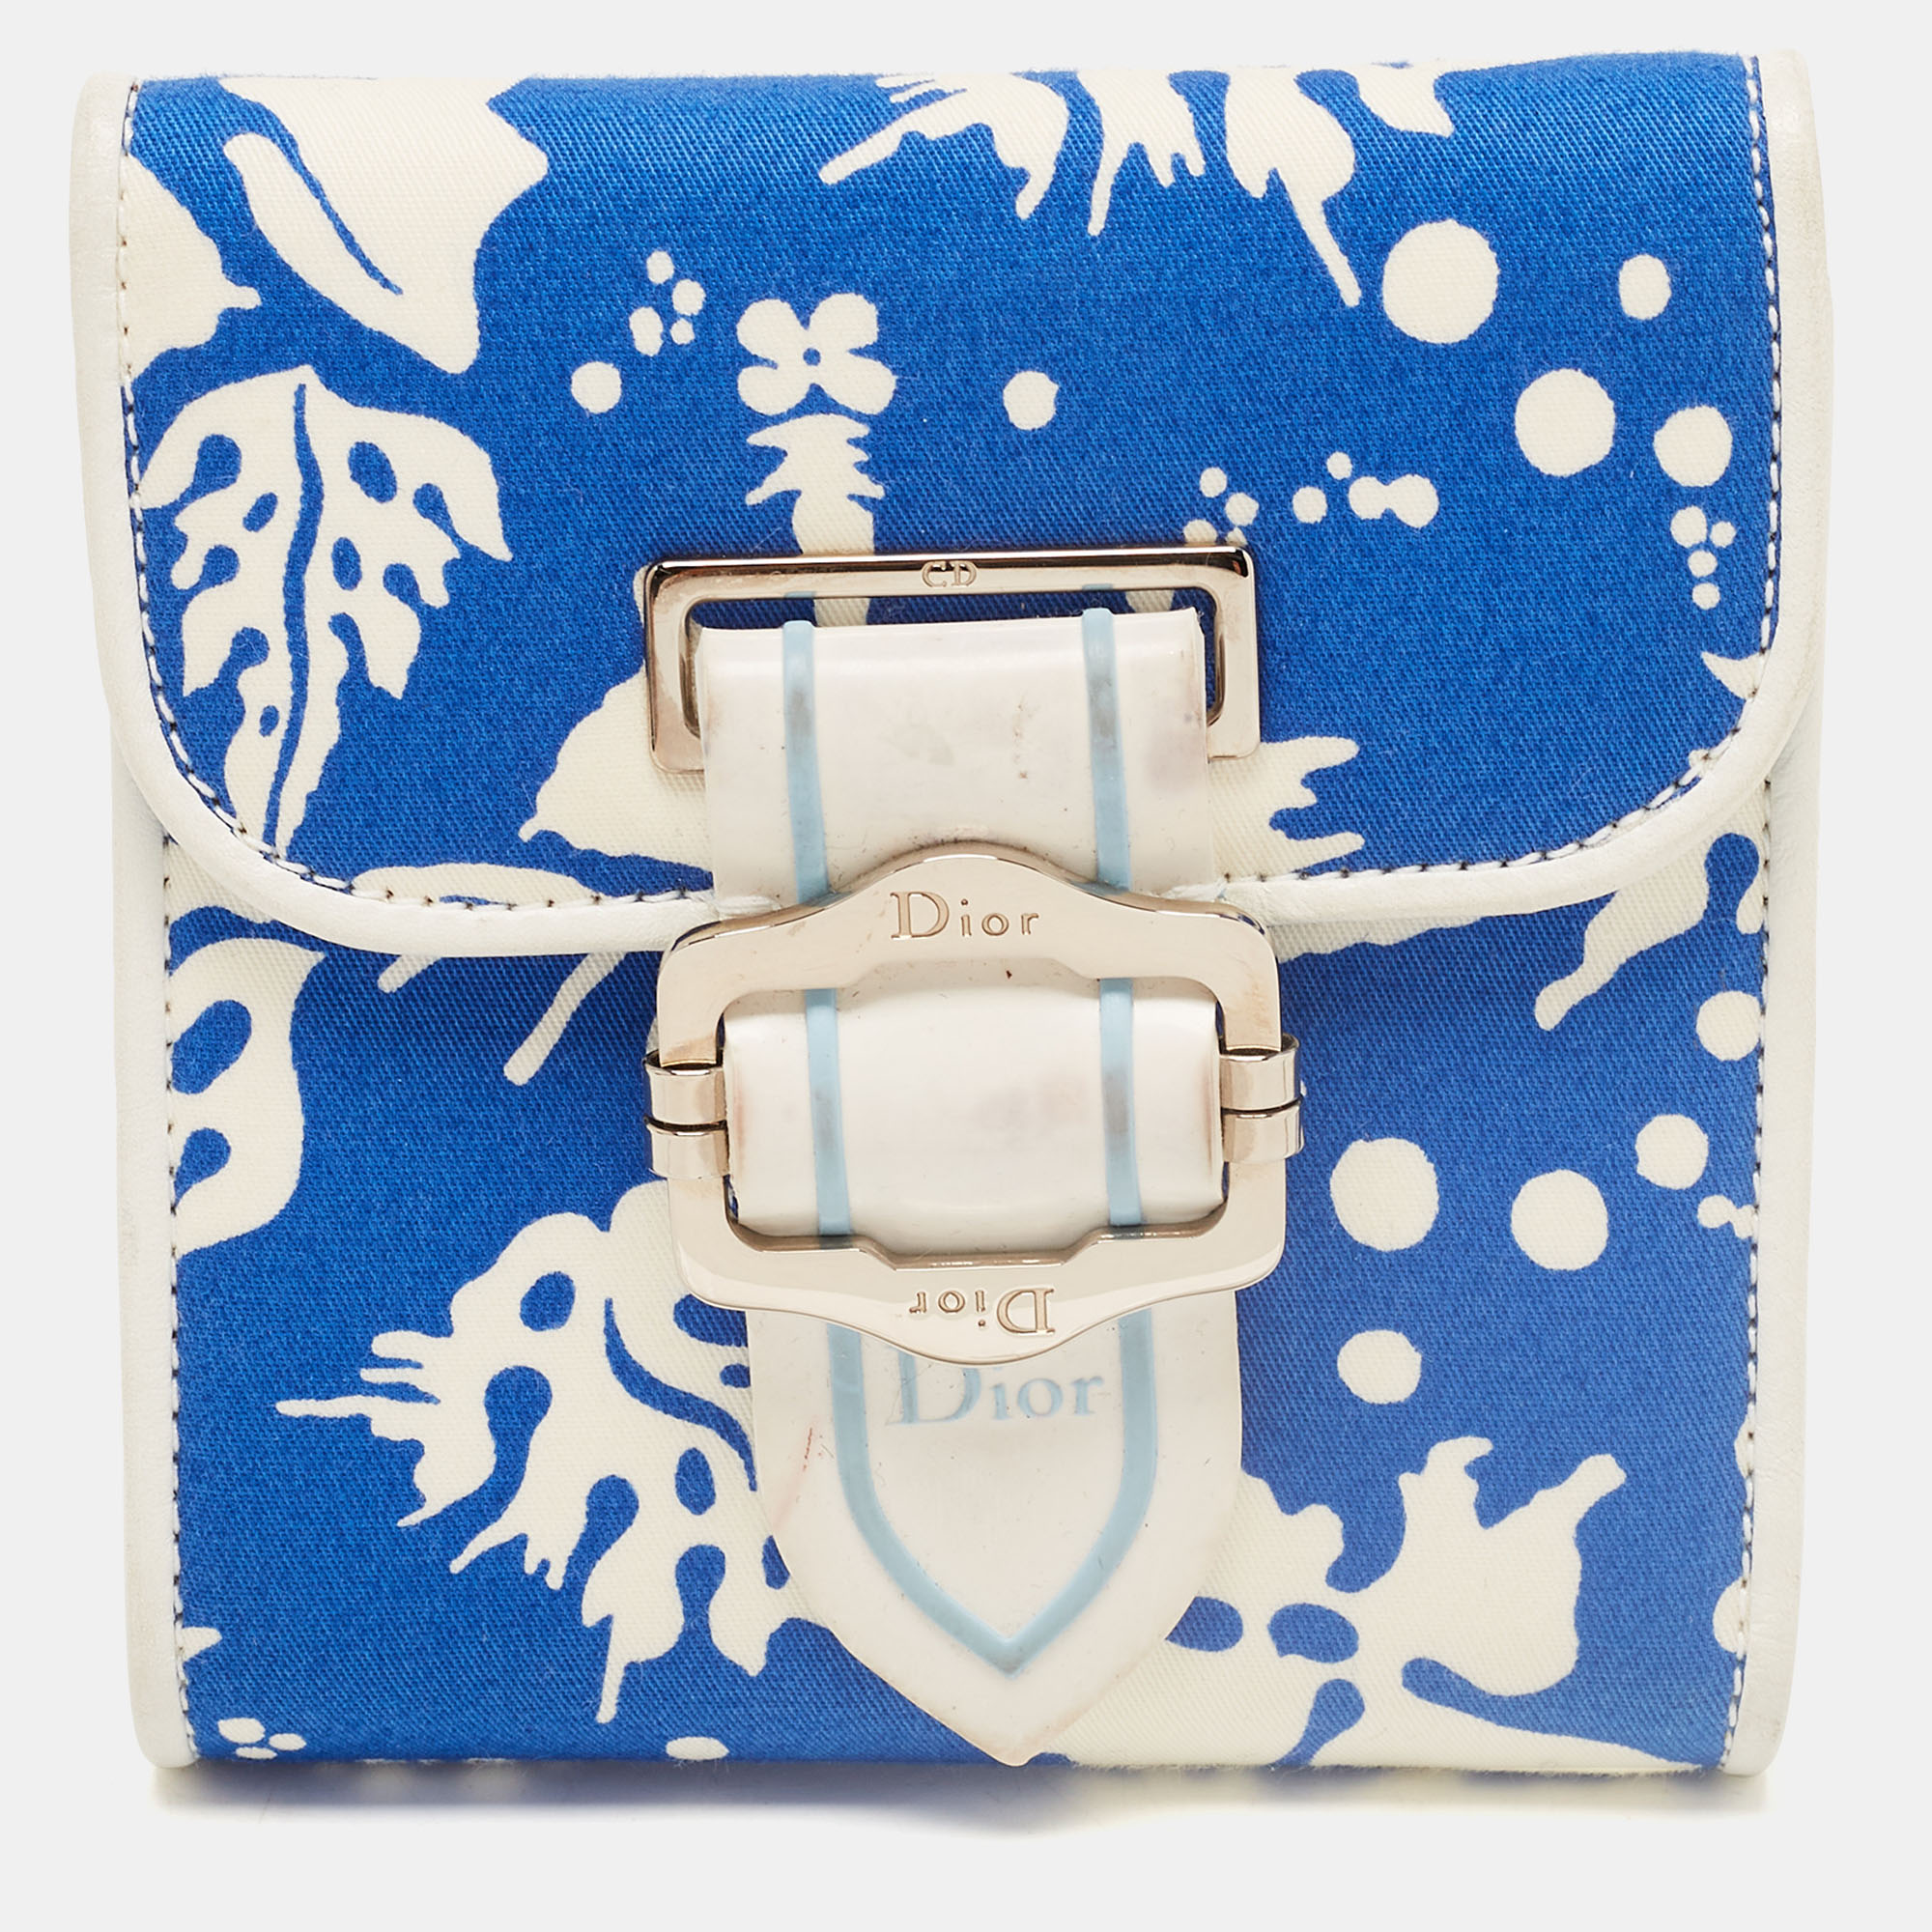 Dior White/Blue Printed Fabric Trifold Wallet